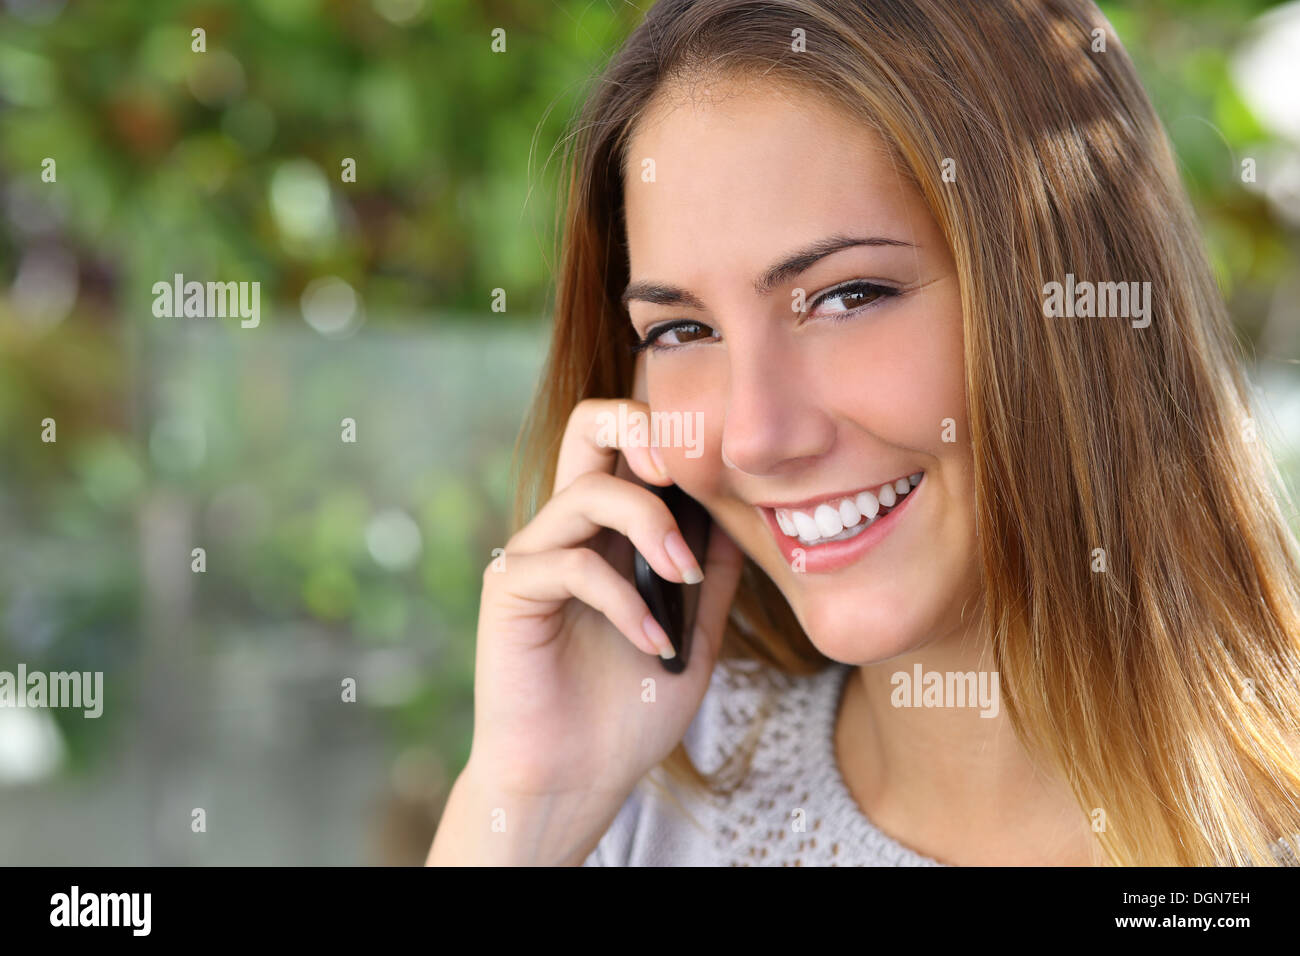 Portrait of a beautiful woman with a perfect white smile talking on the mobile phone outdoor Stock Photo